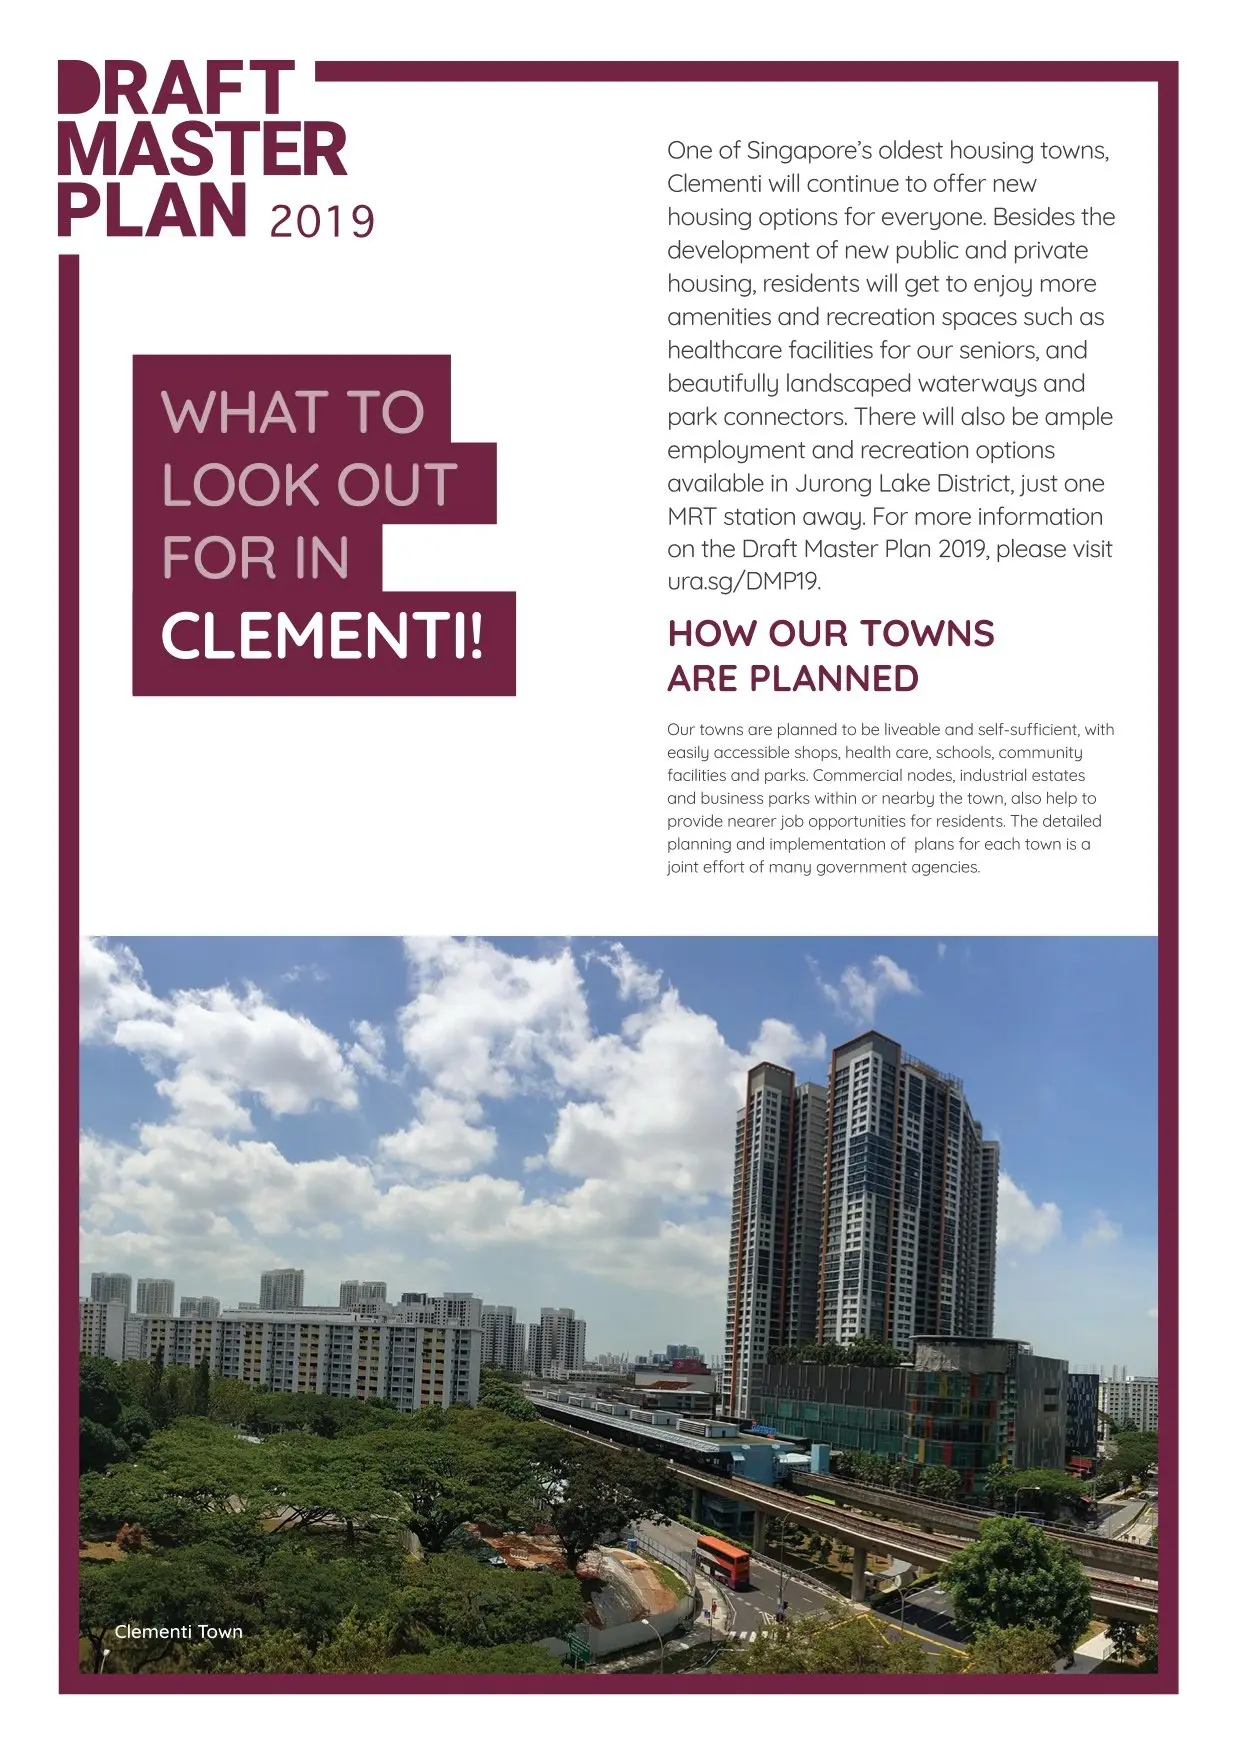 Changes in Clementi